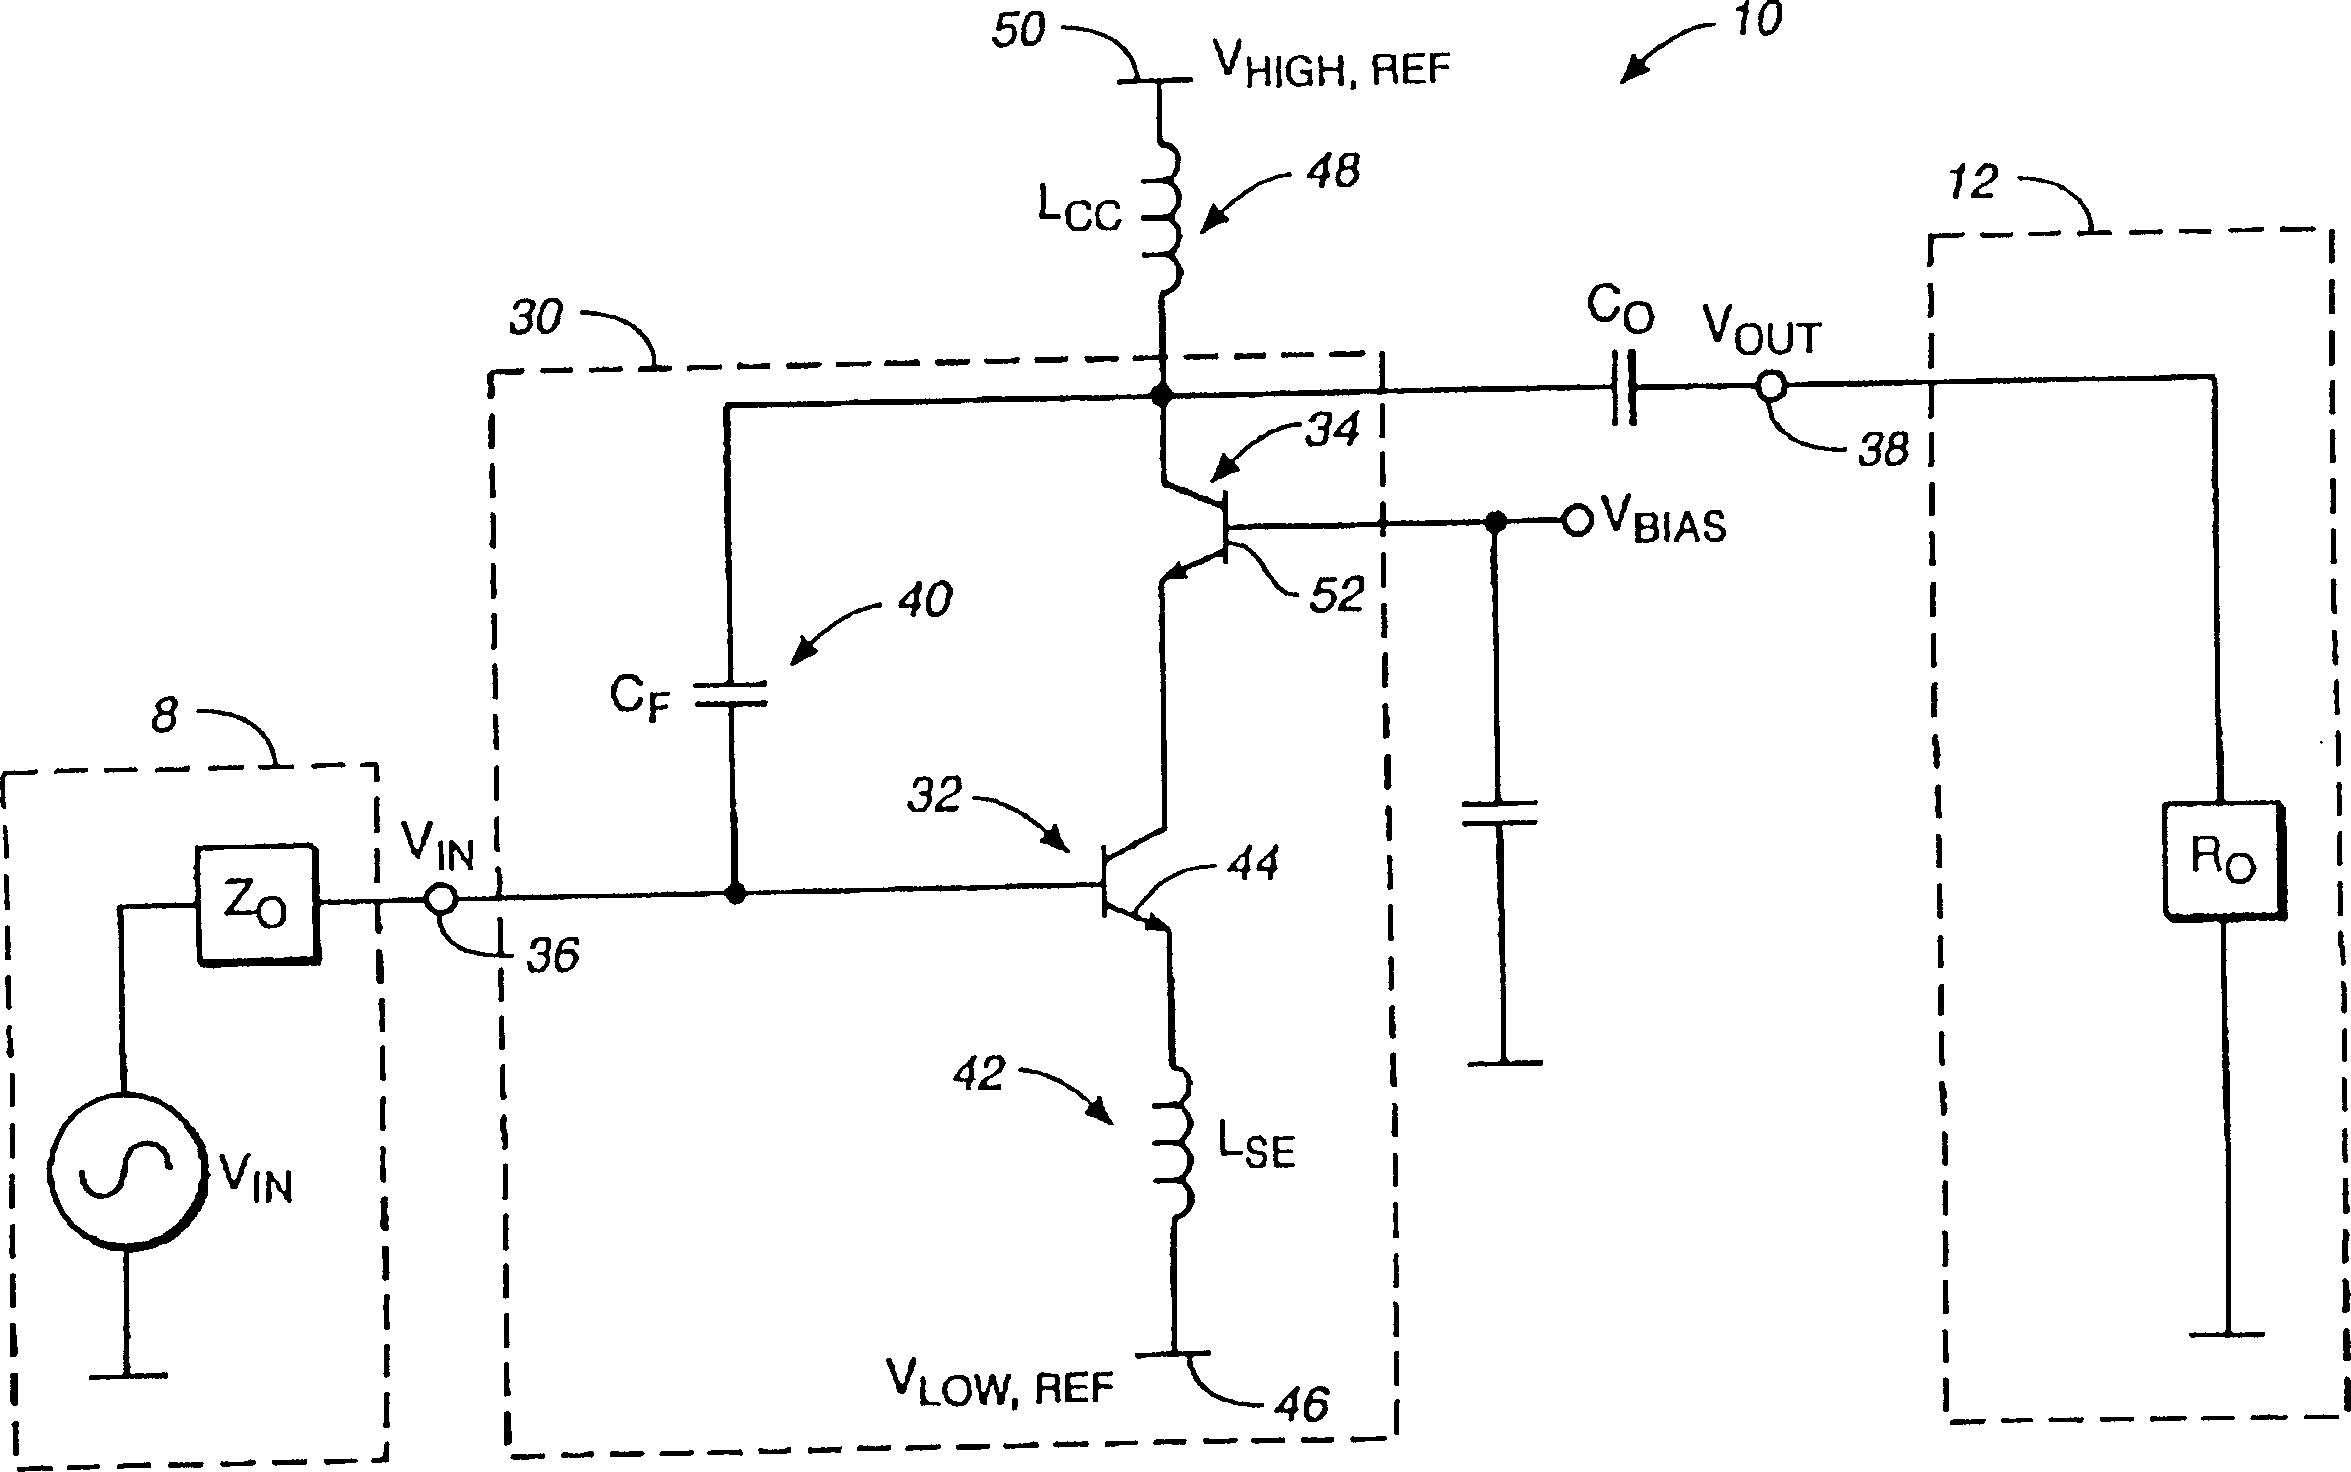 Radio frequency amplifier with reduced intermodulation distortion